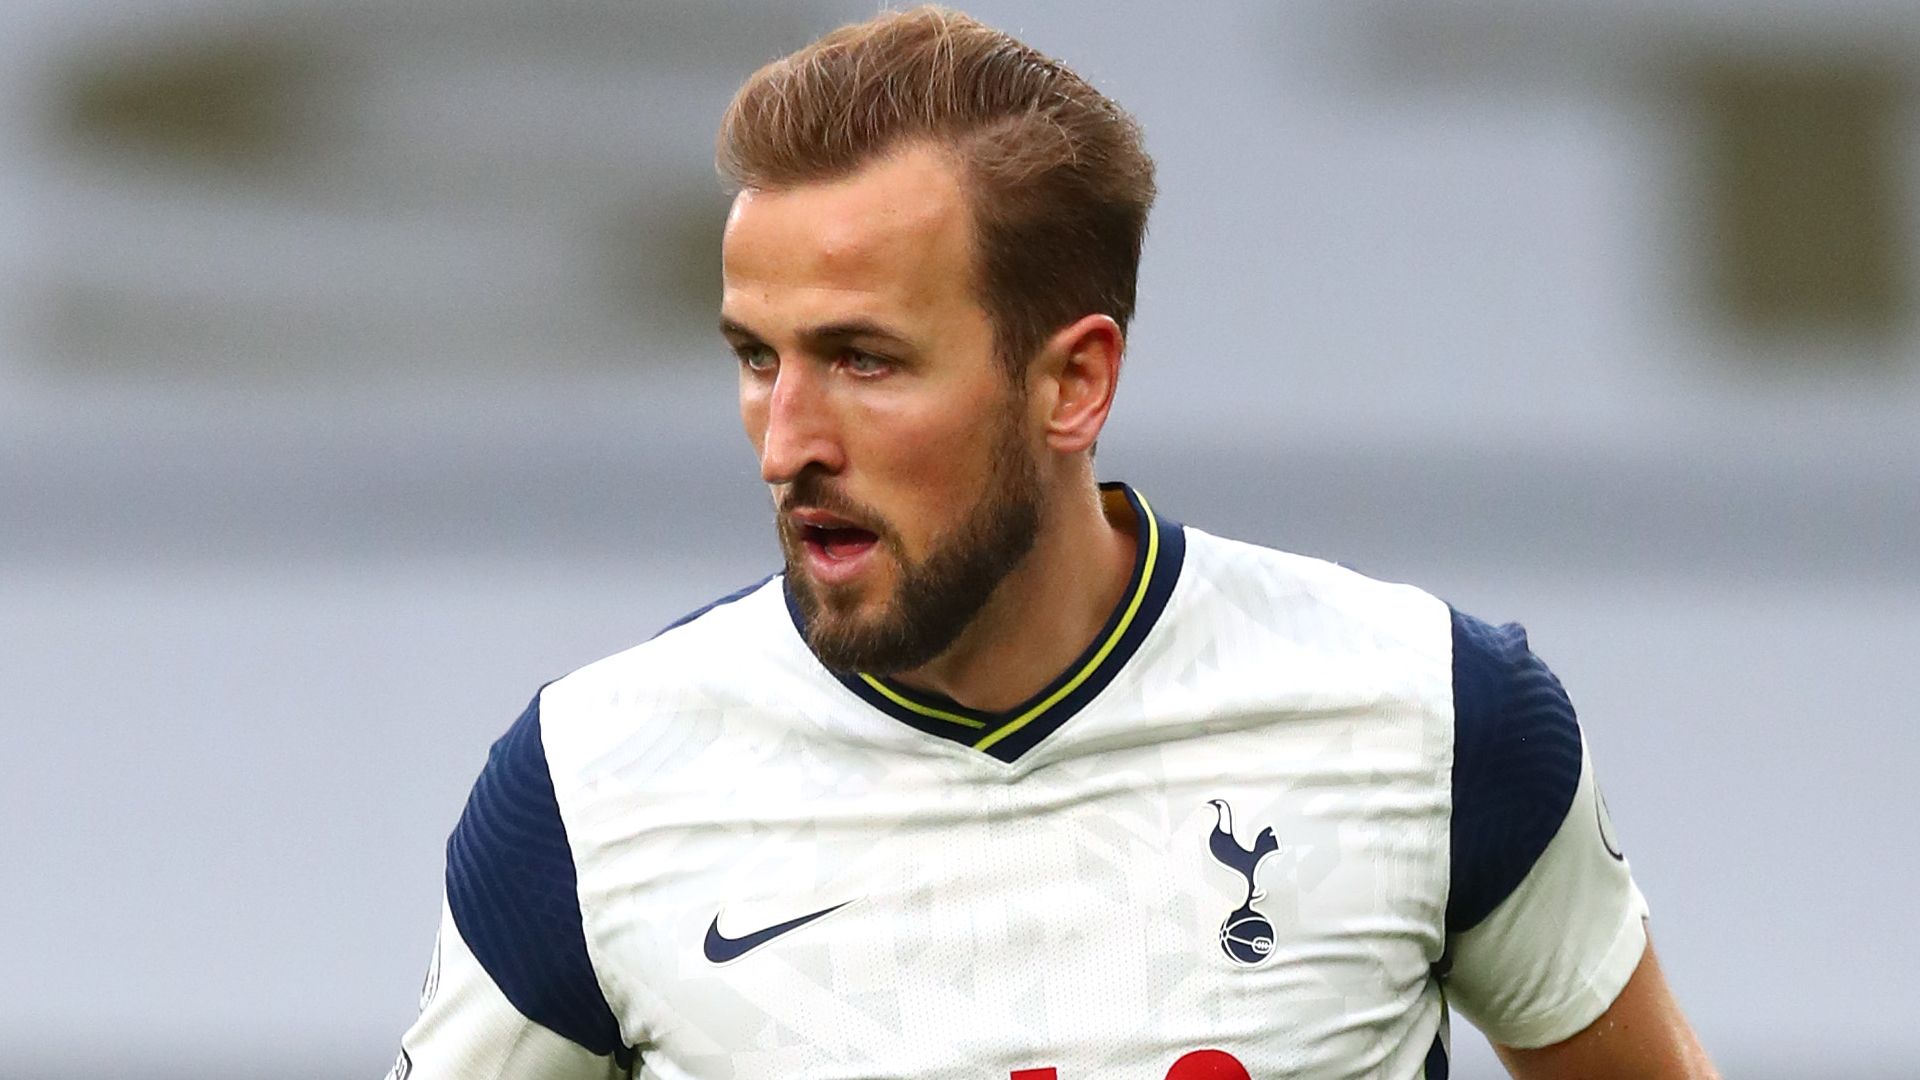 Maccabi Haifa apologise to Spurs after viral 'Harry Kane on my c*ck' video